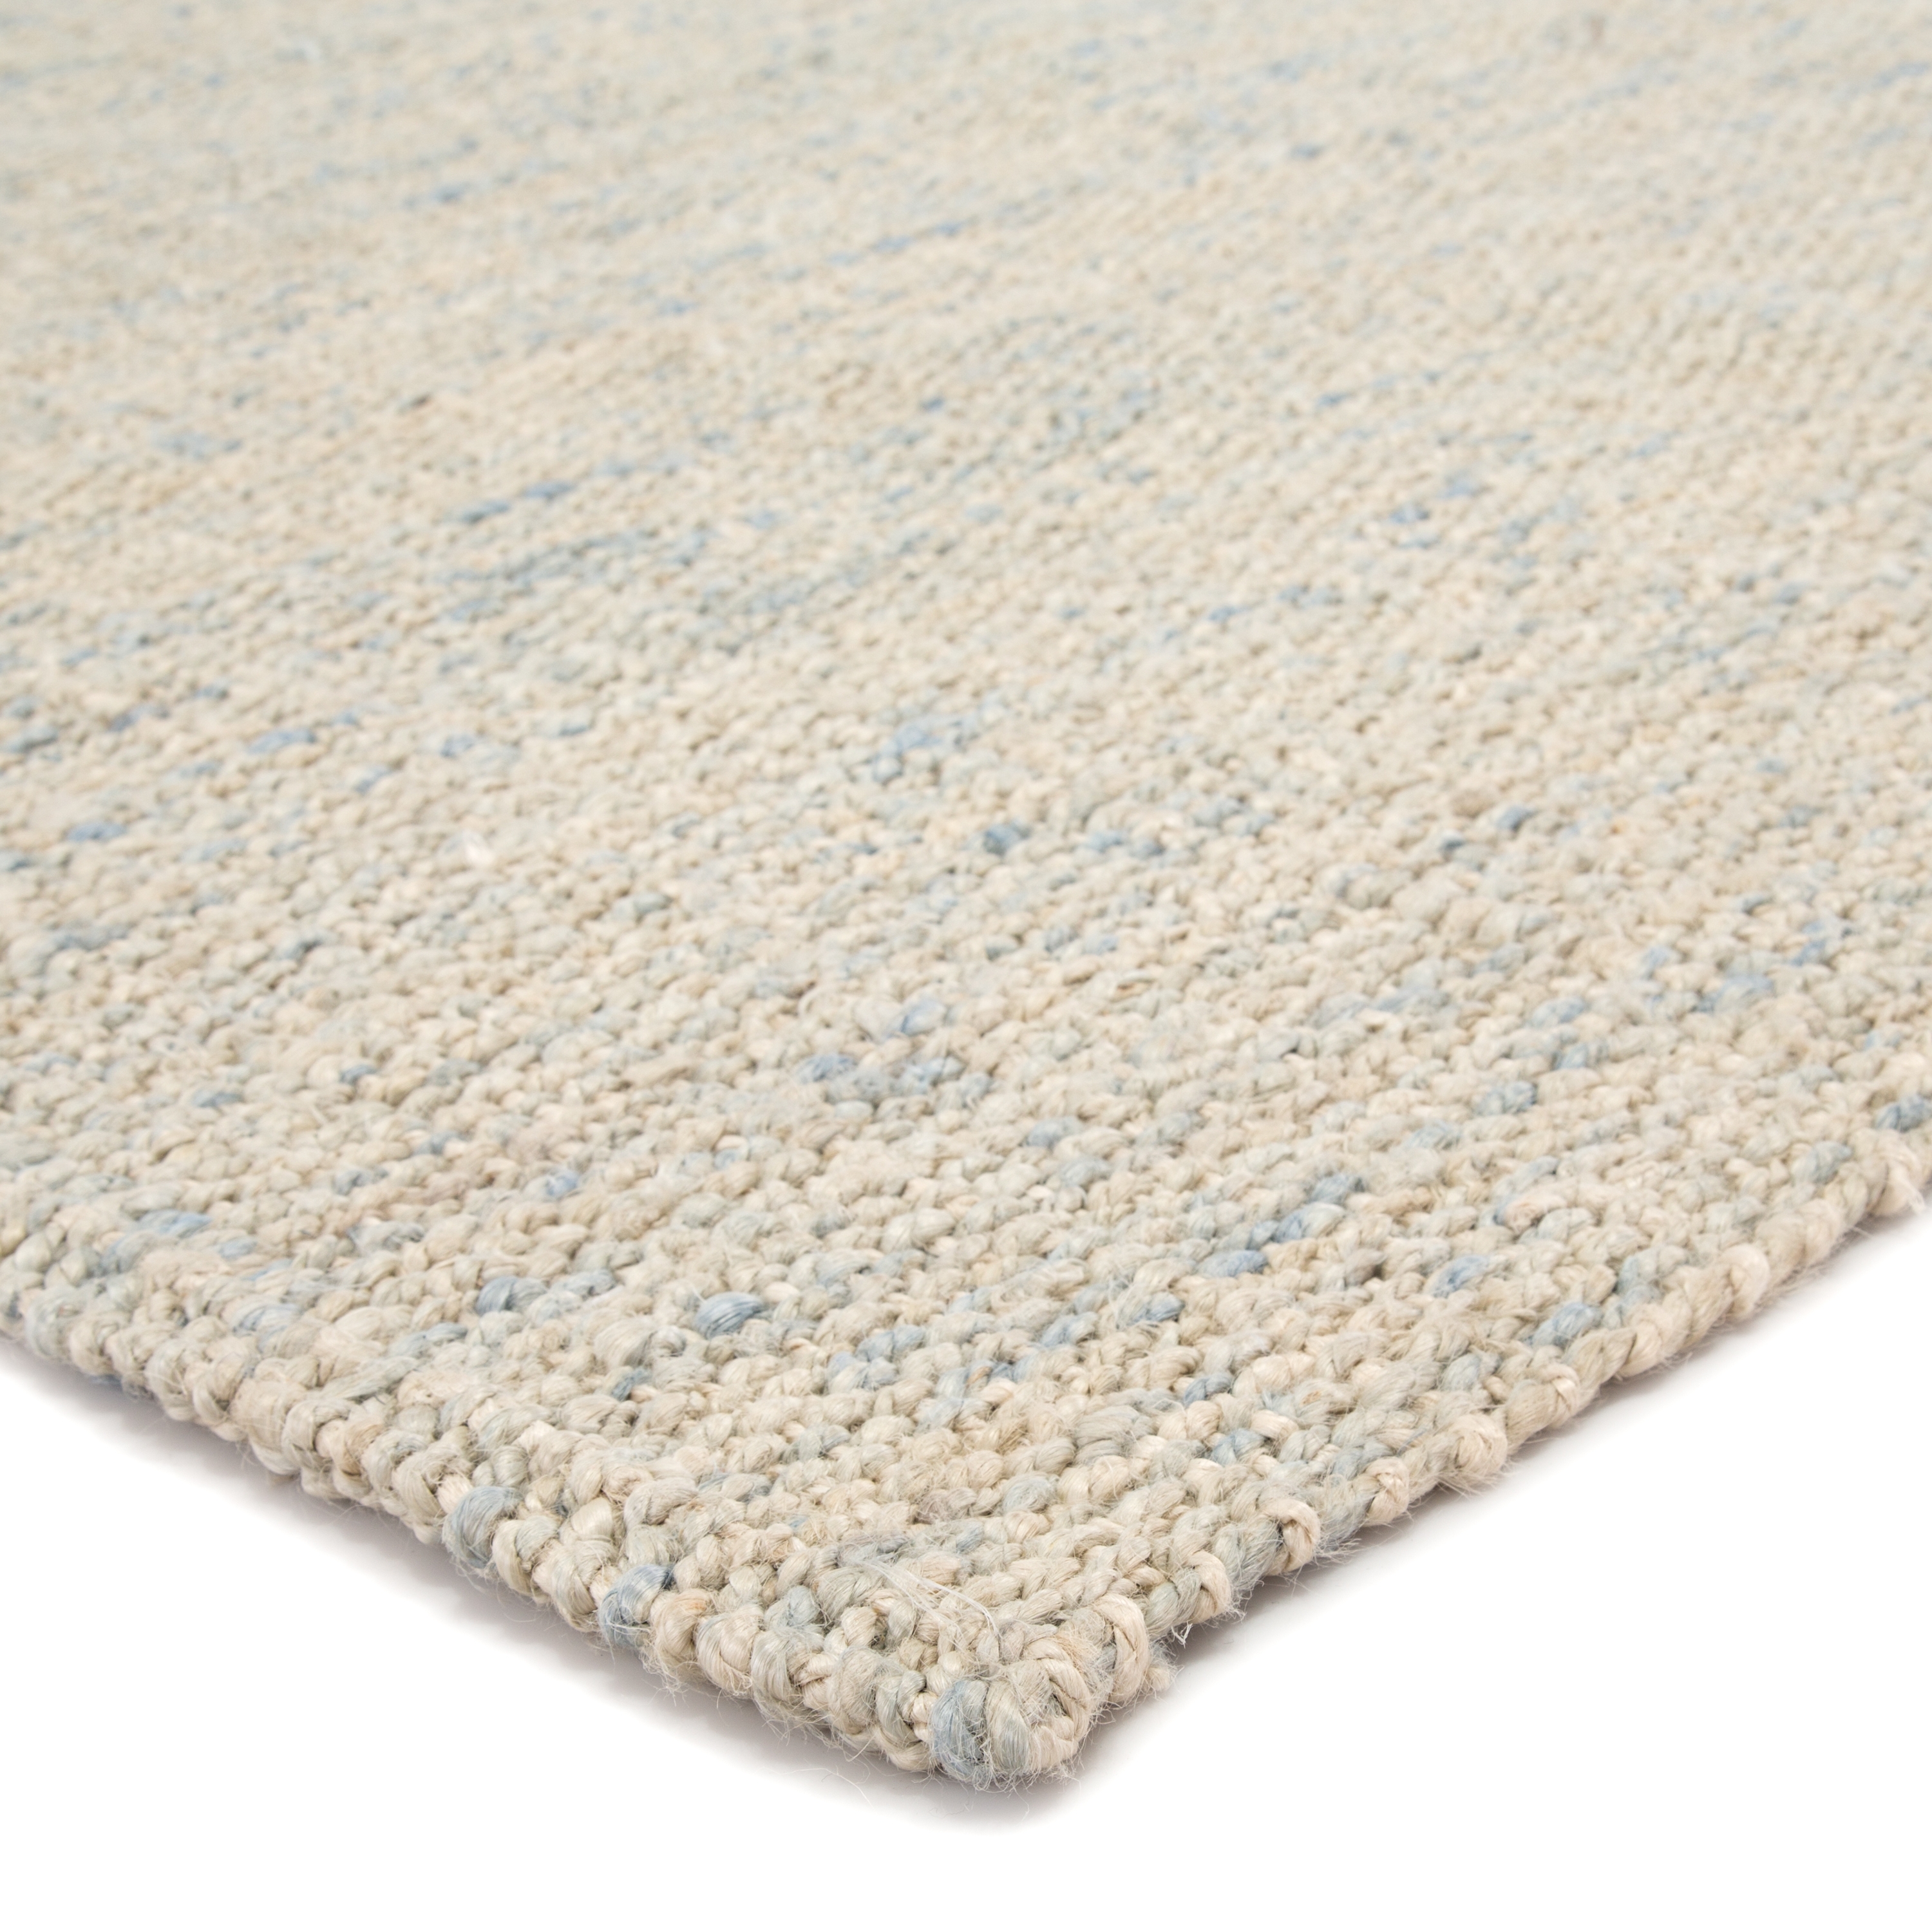 Bluffton Natural Solid Ivory/ Blue Area Rug (9'X12') - Image 1